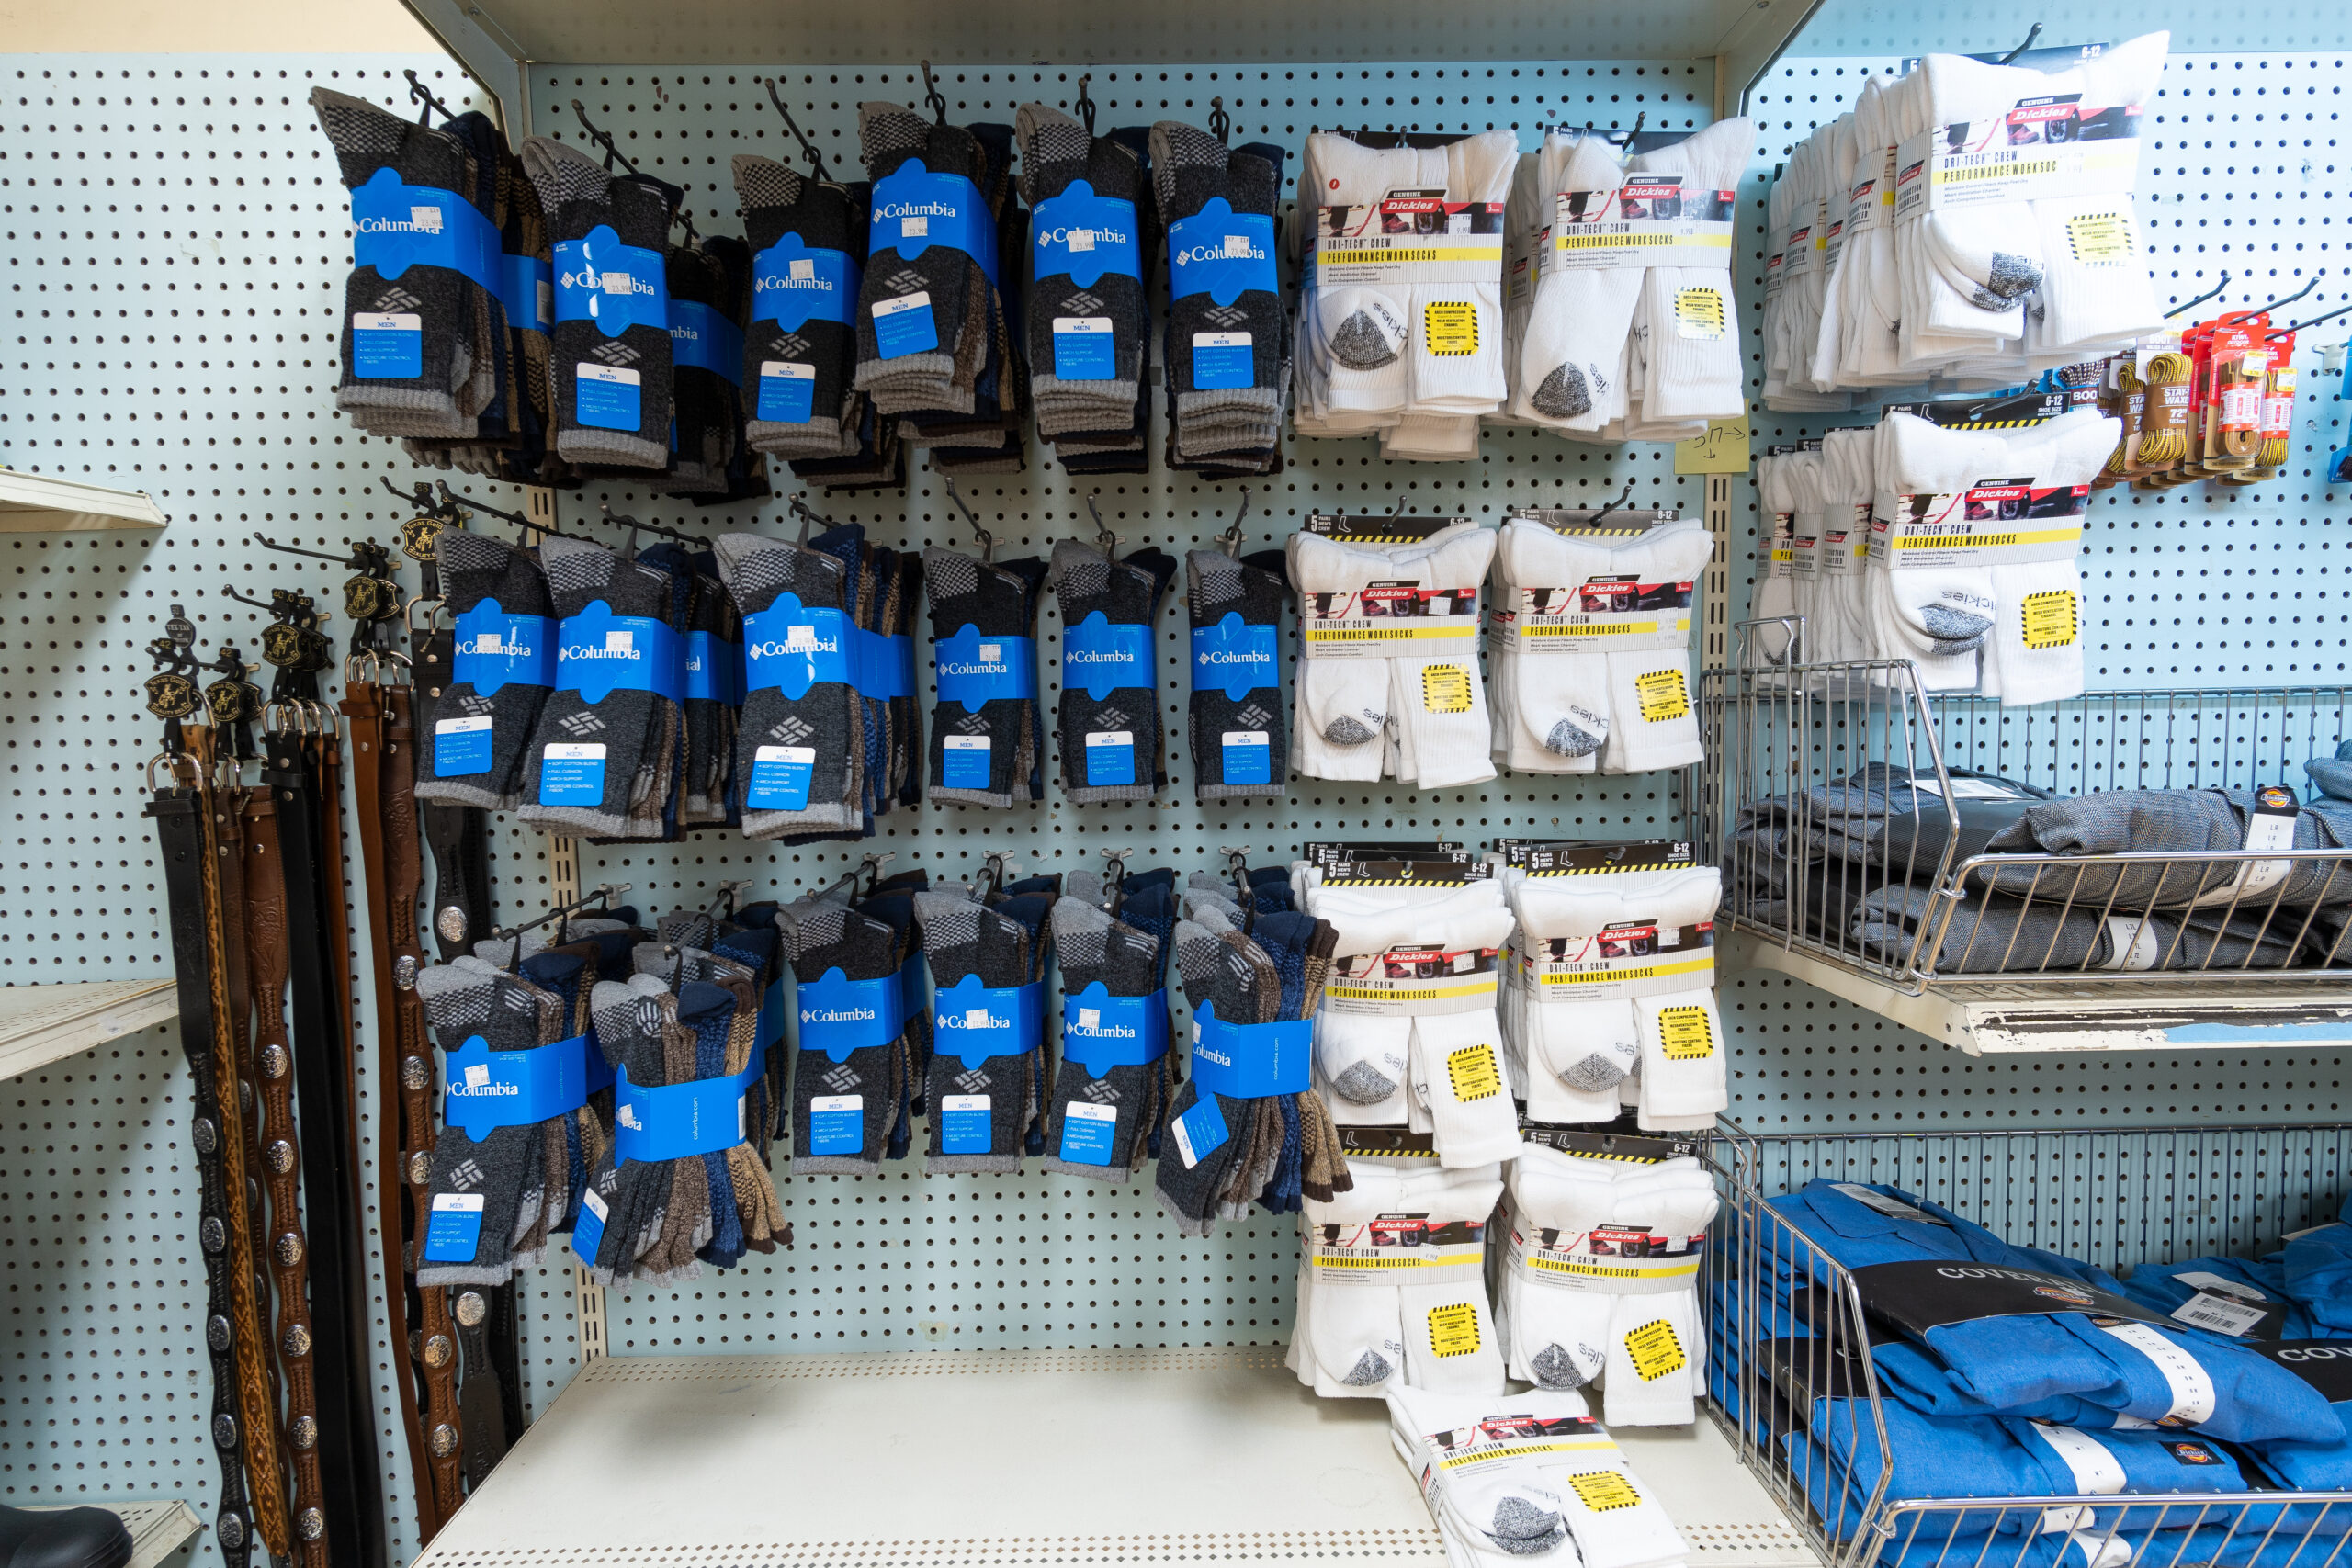 Moisture wicking work socks for sale at a Four Star Supply